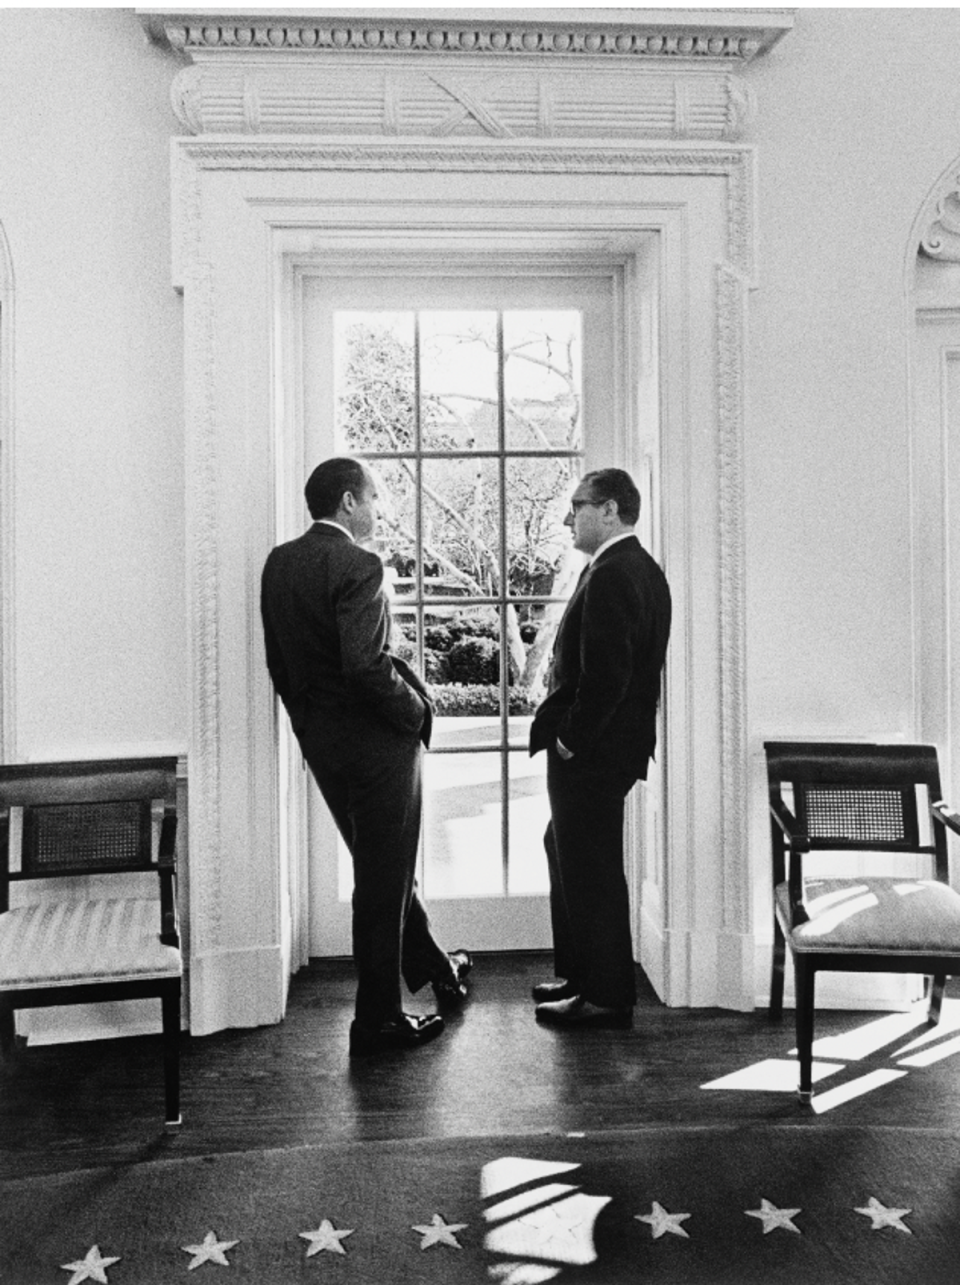 Richard Nixon and Harry Kisisnger at the Oval Office on 10 February 1971 (Richard Nixon Presidential Library)